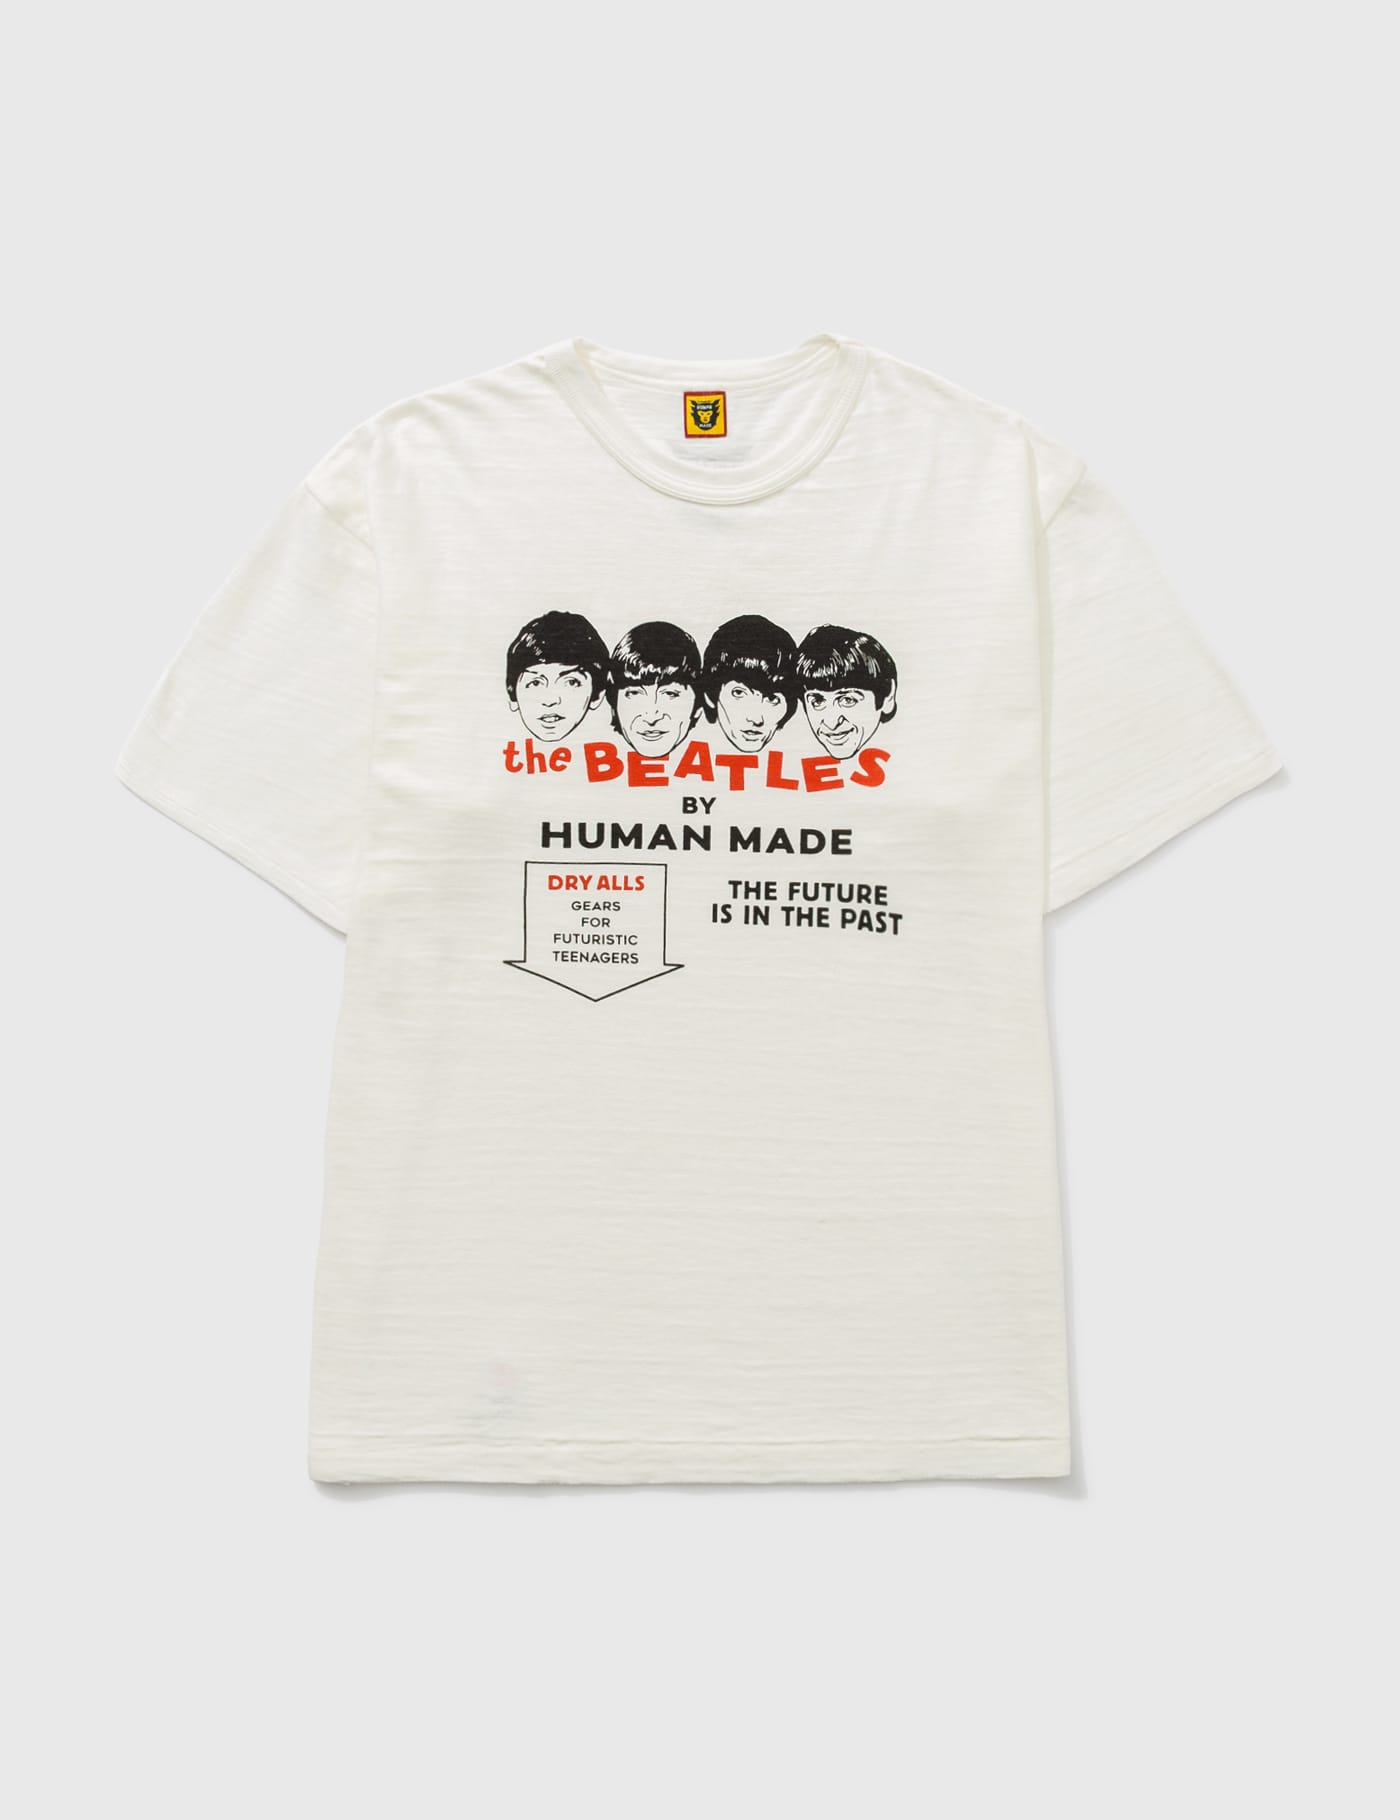 Human Made - T-shirt Beatles | HBX - Globally Curated Fashion and 